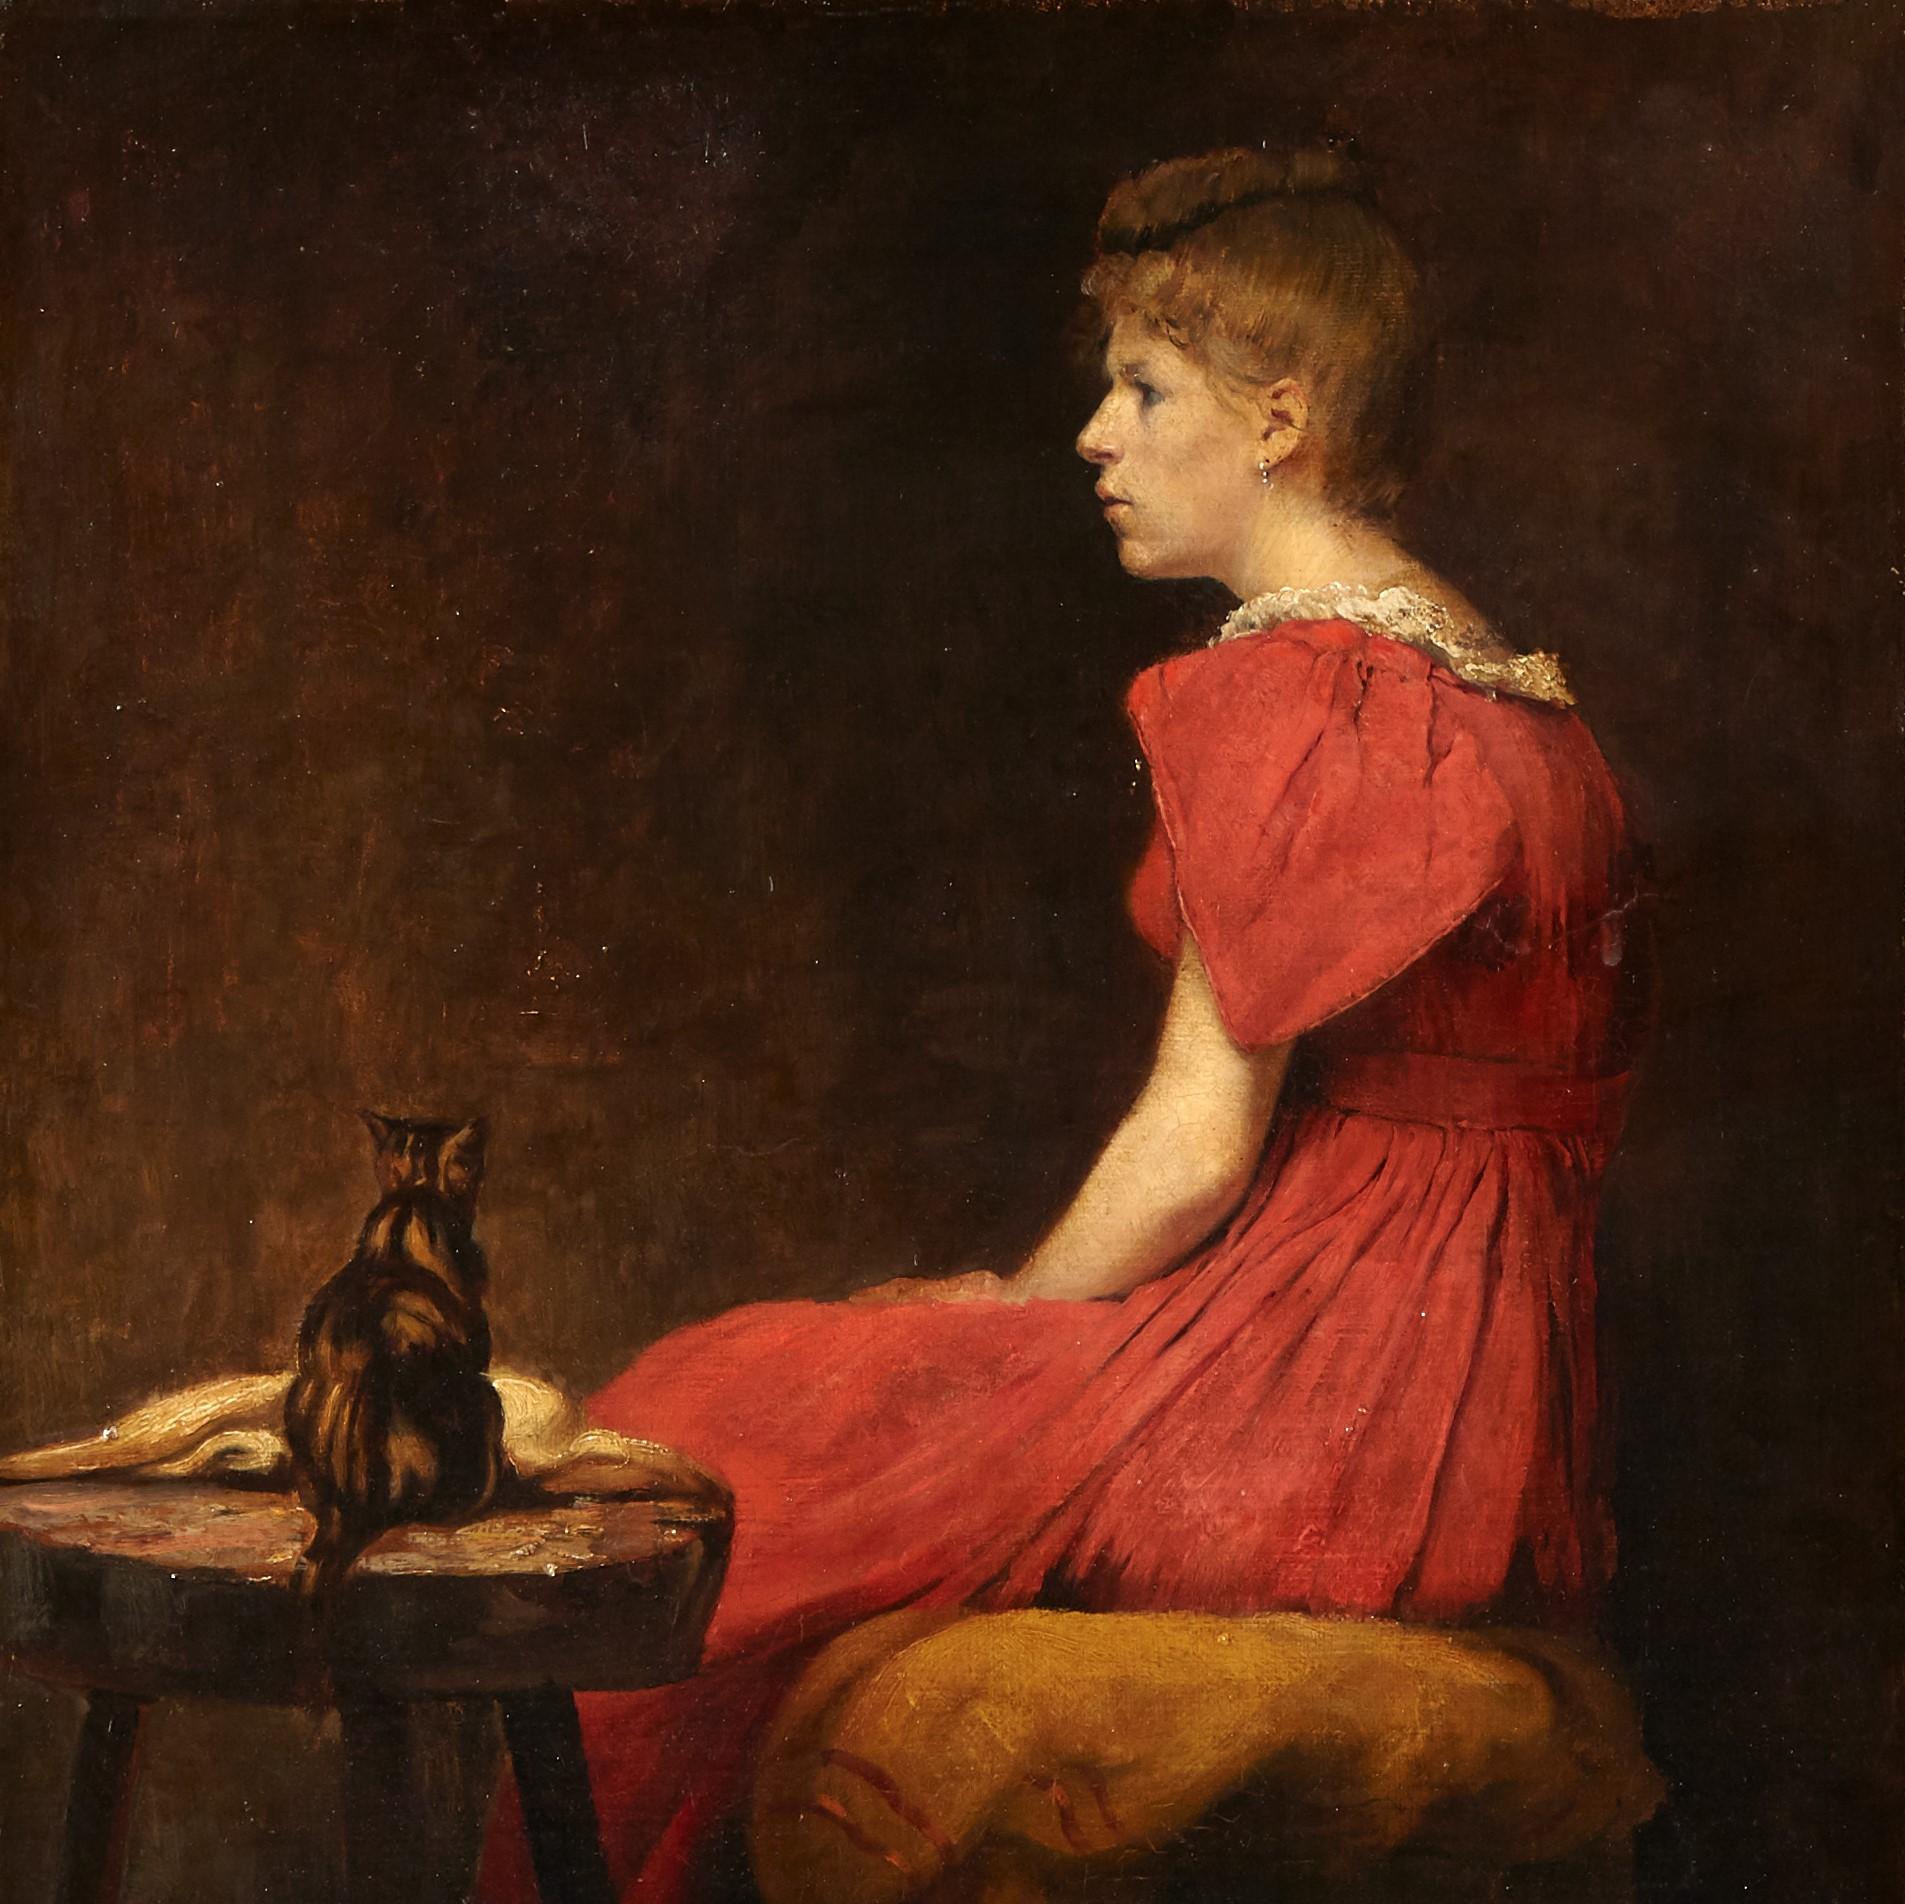 Figurative Painting Joseph Bail - Lady in a red dress with a kitten - Robe